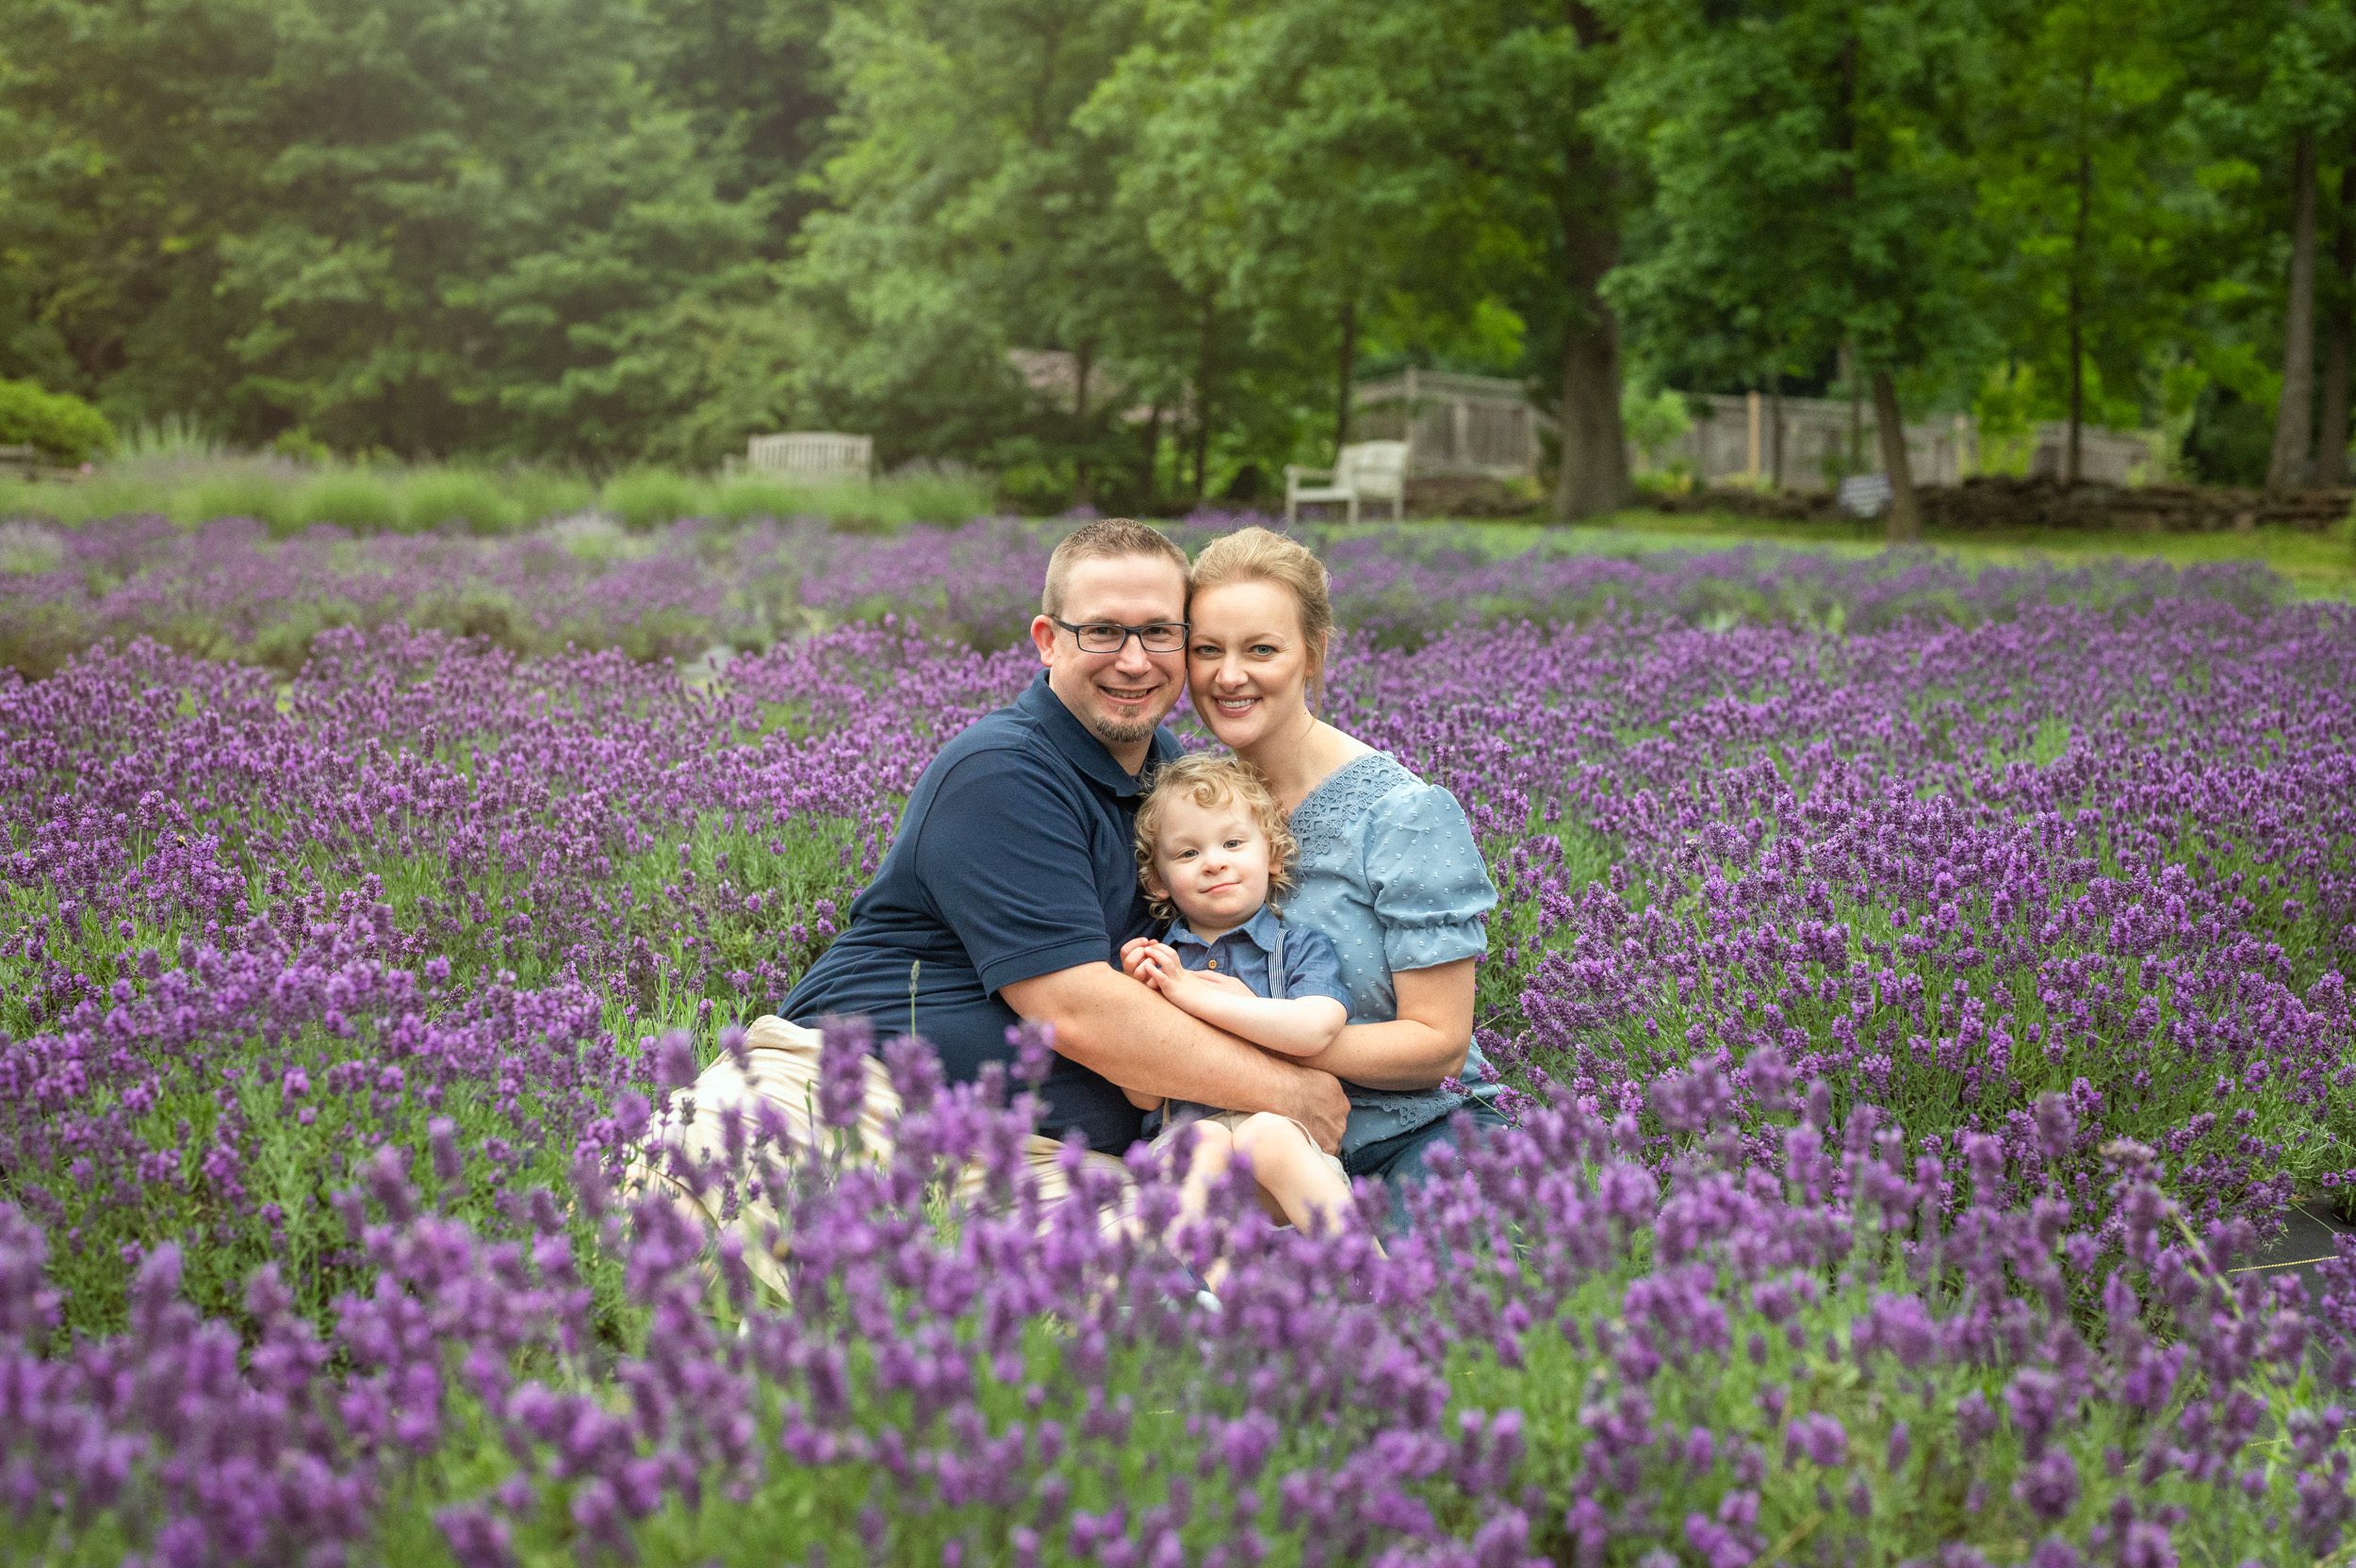 parents and their young son sitting in a field of purple lavender and smiling at the camera during a family photoshoot